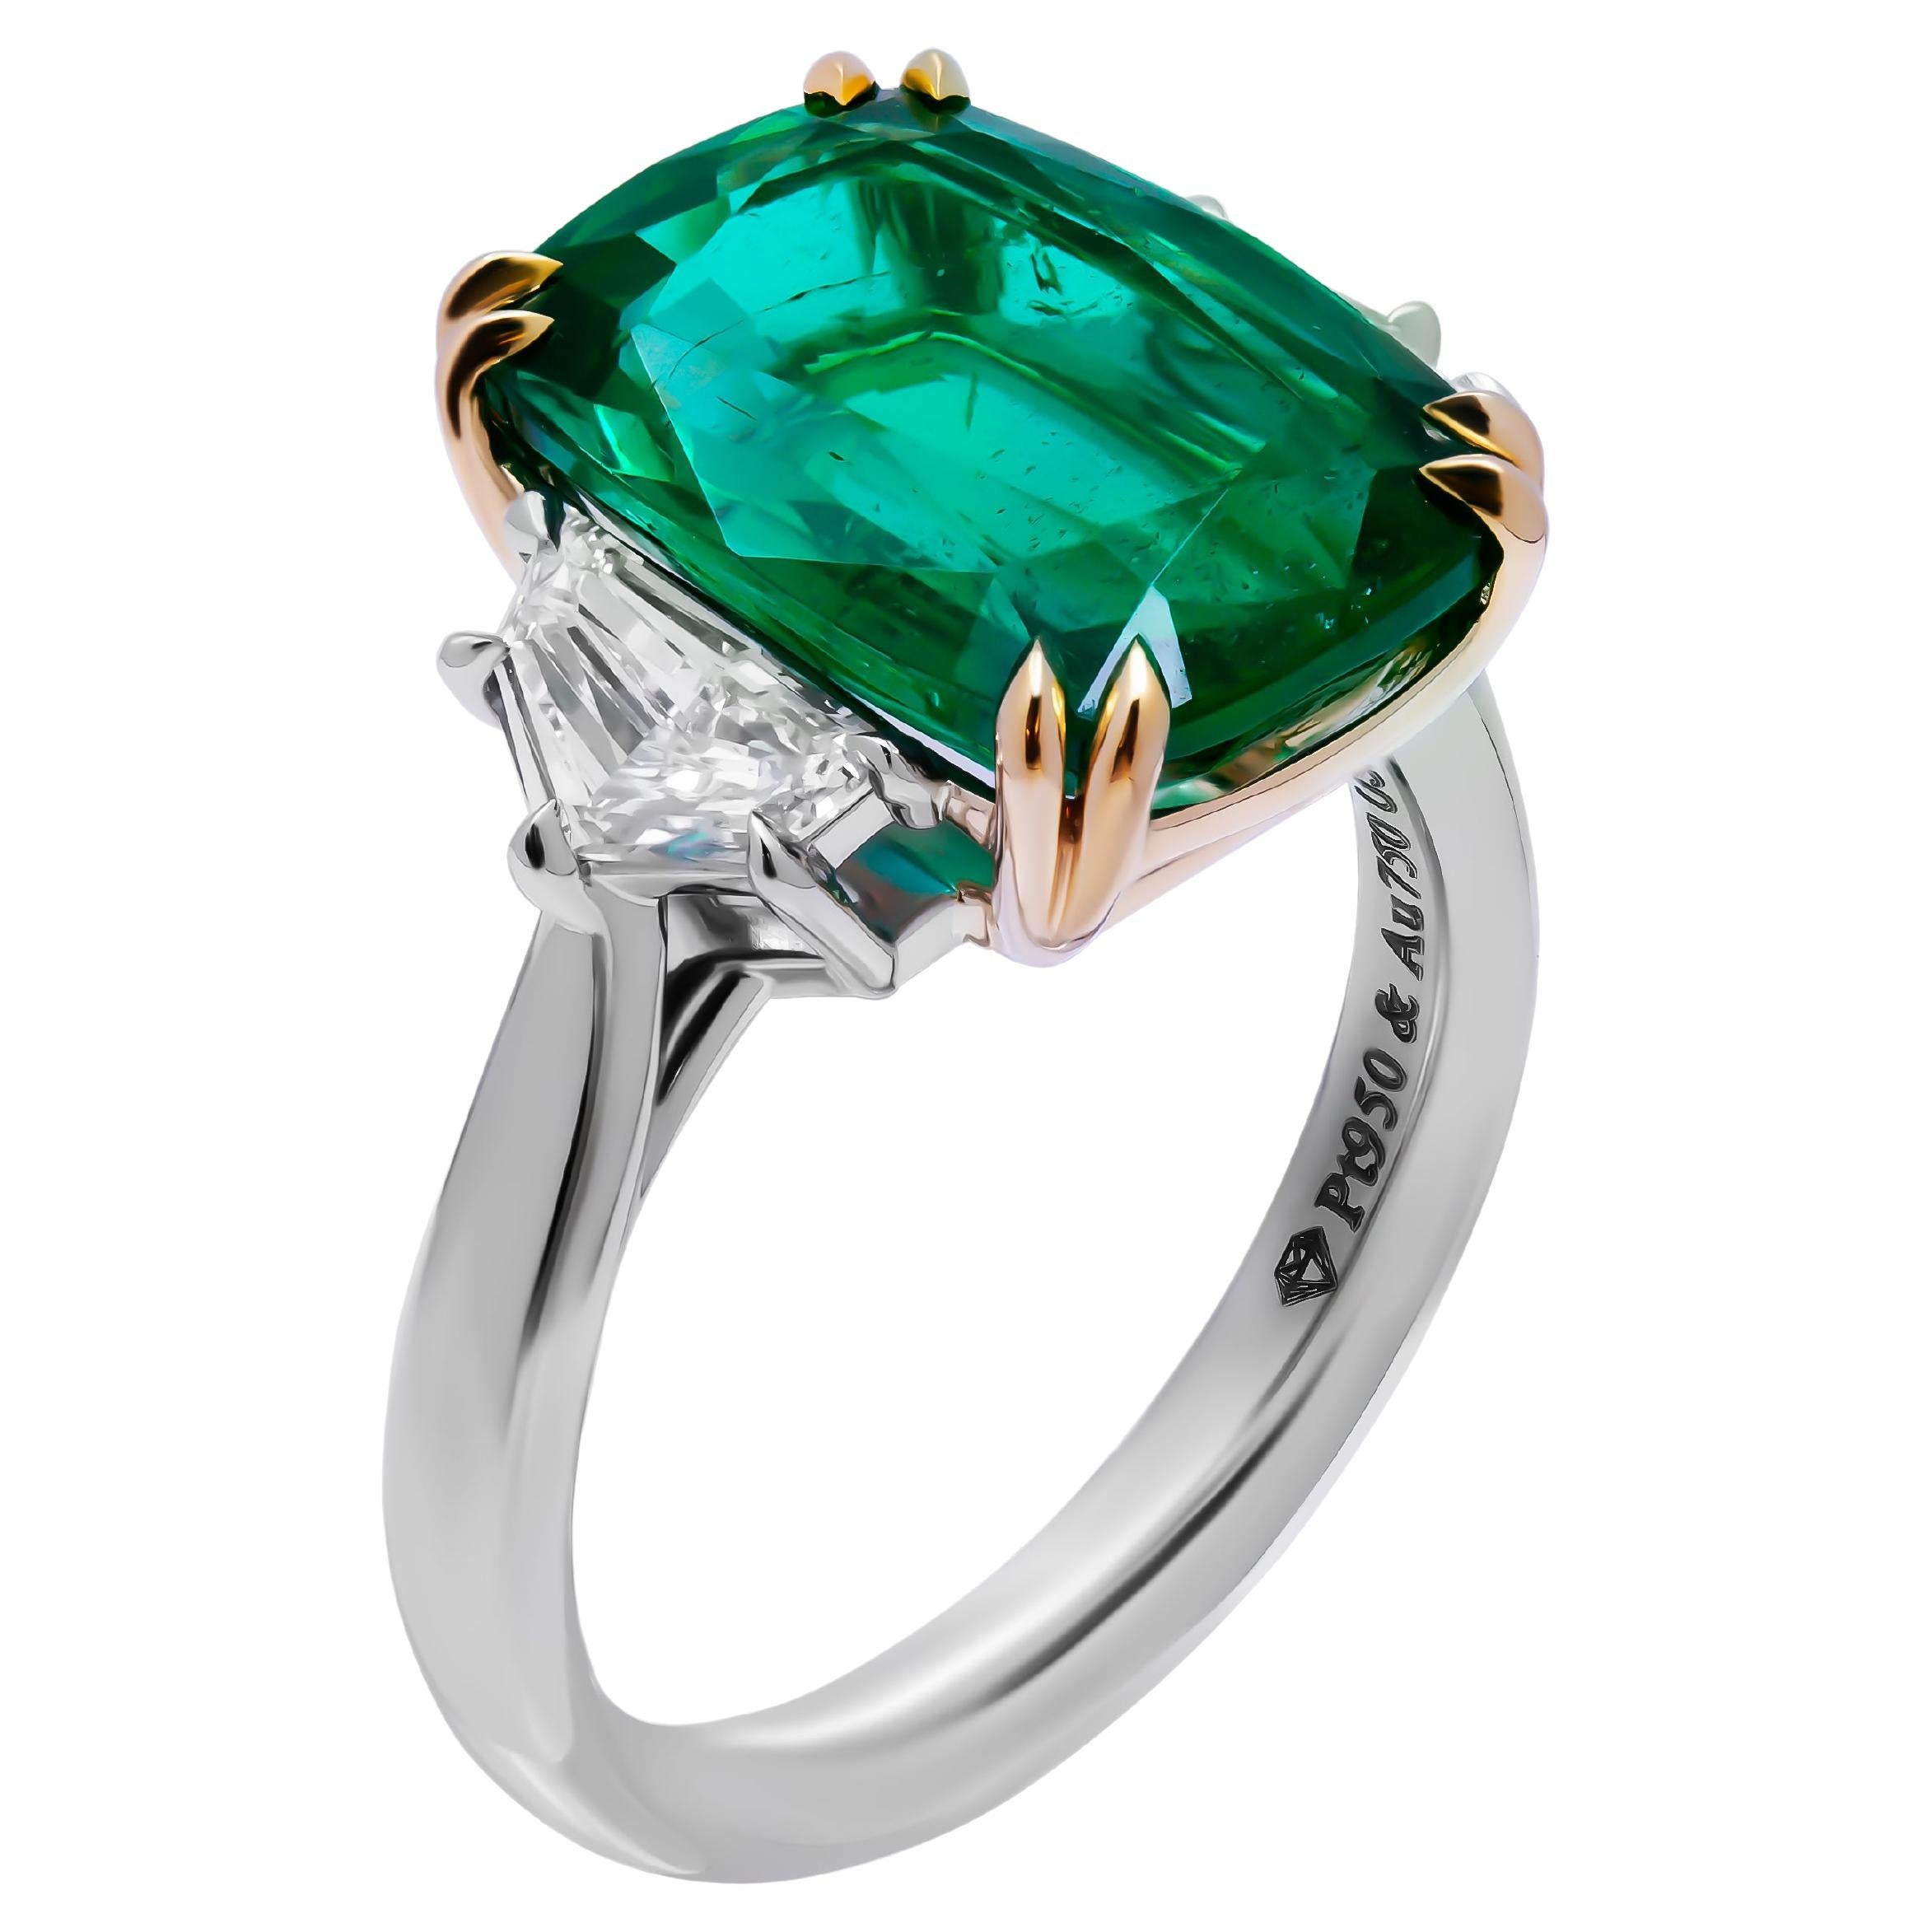 GIA Certified 3 stone ring with 5.03ct Green Emerald Cushion Cut For Sale